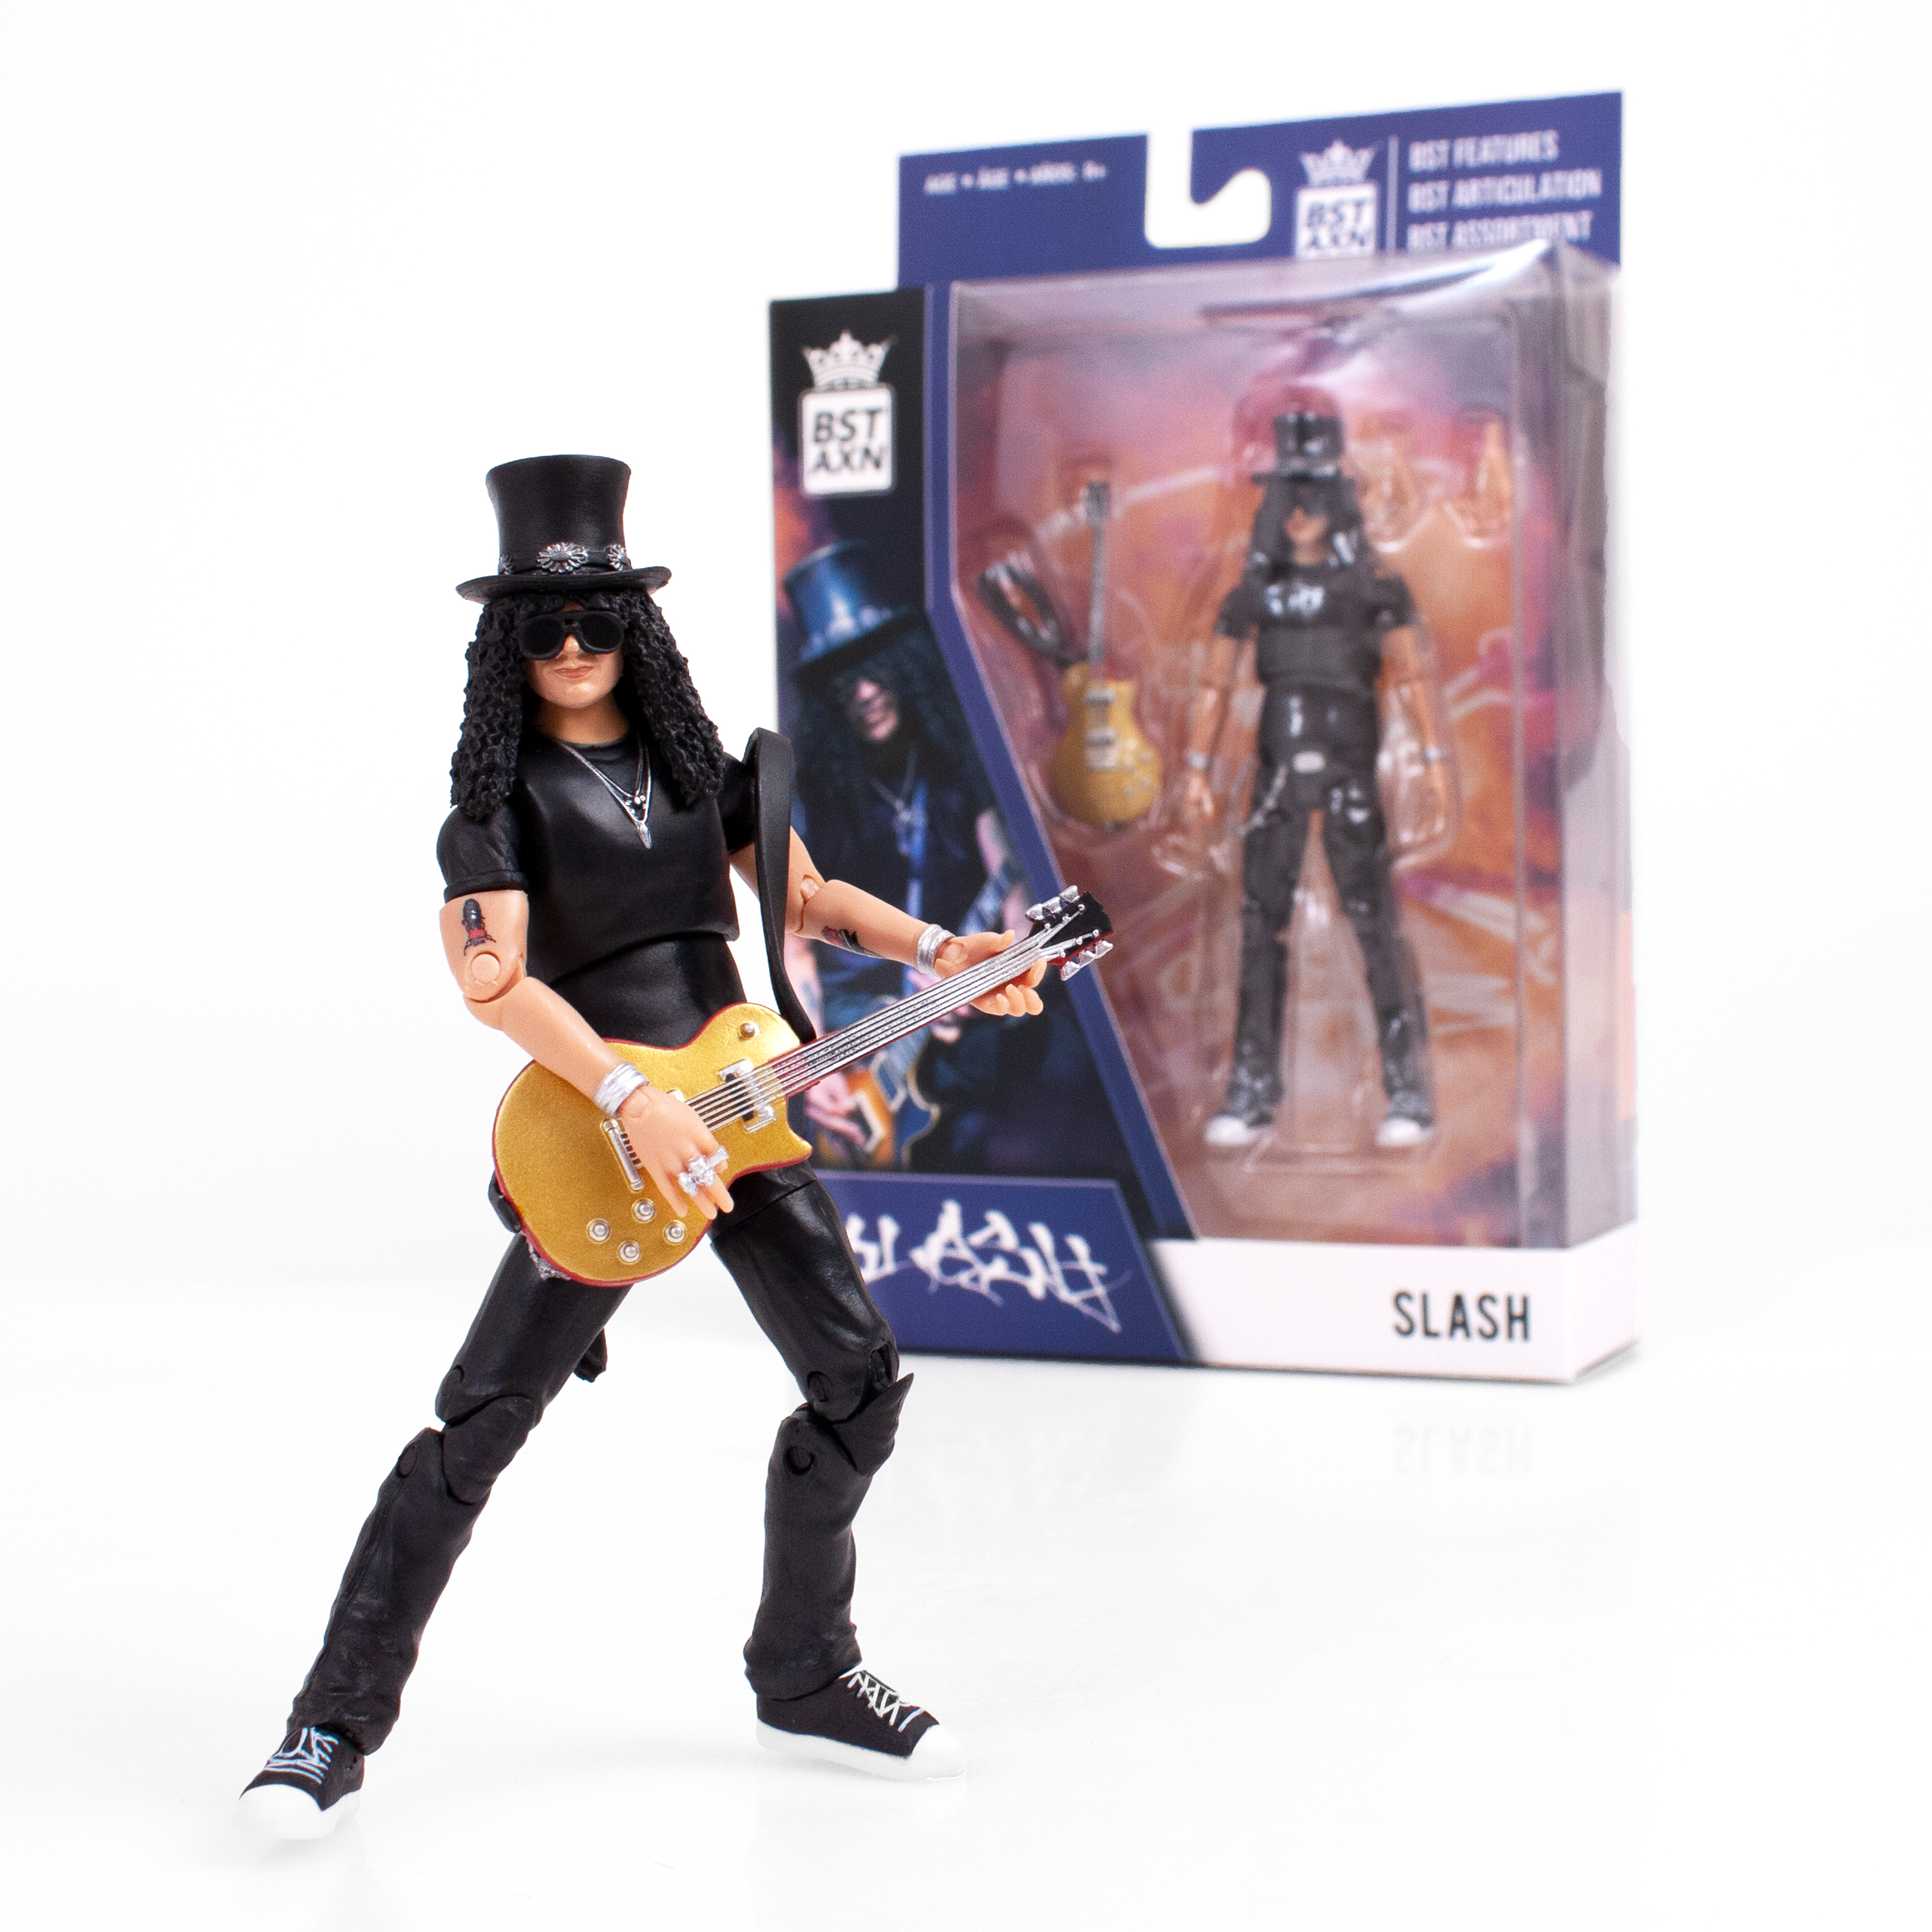 Guns N Roses Slash - The Loyal Subjects BST AXN 5" Action Figure - image 1 of 5